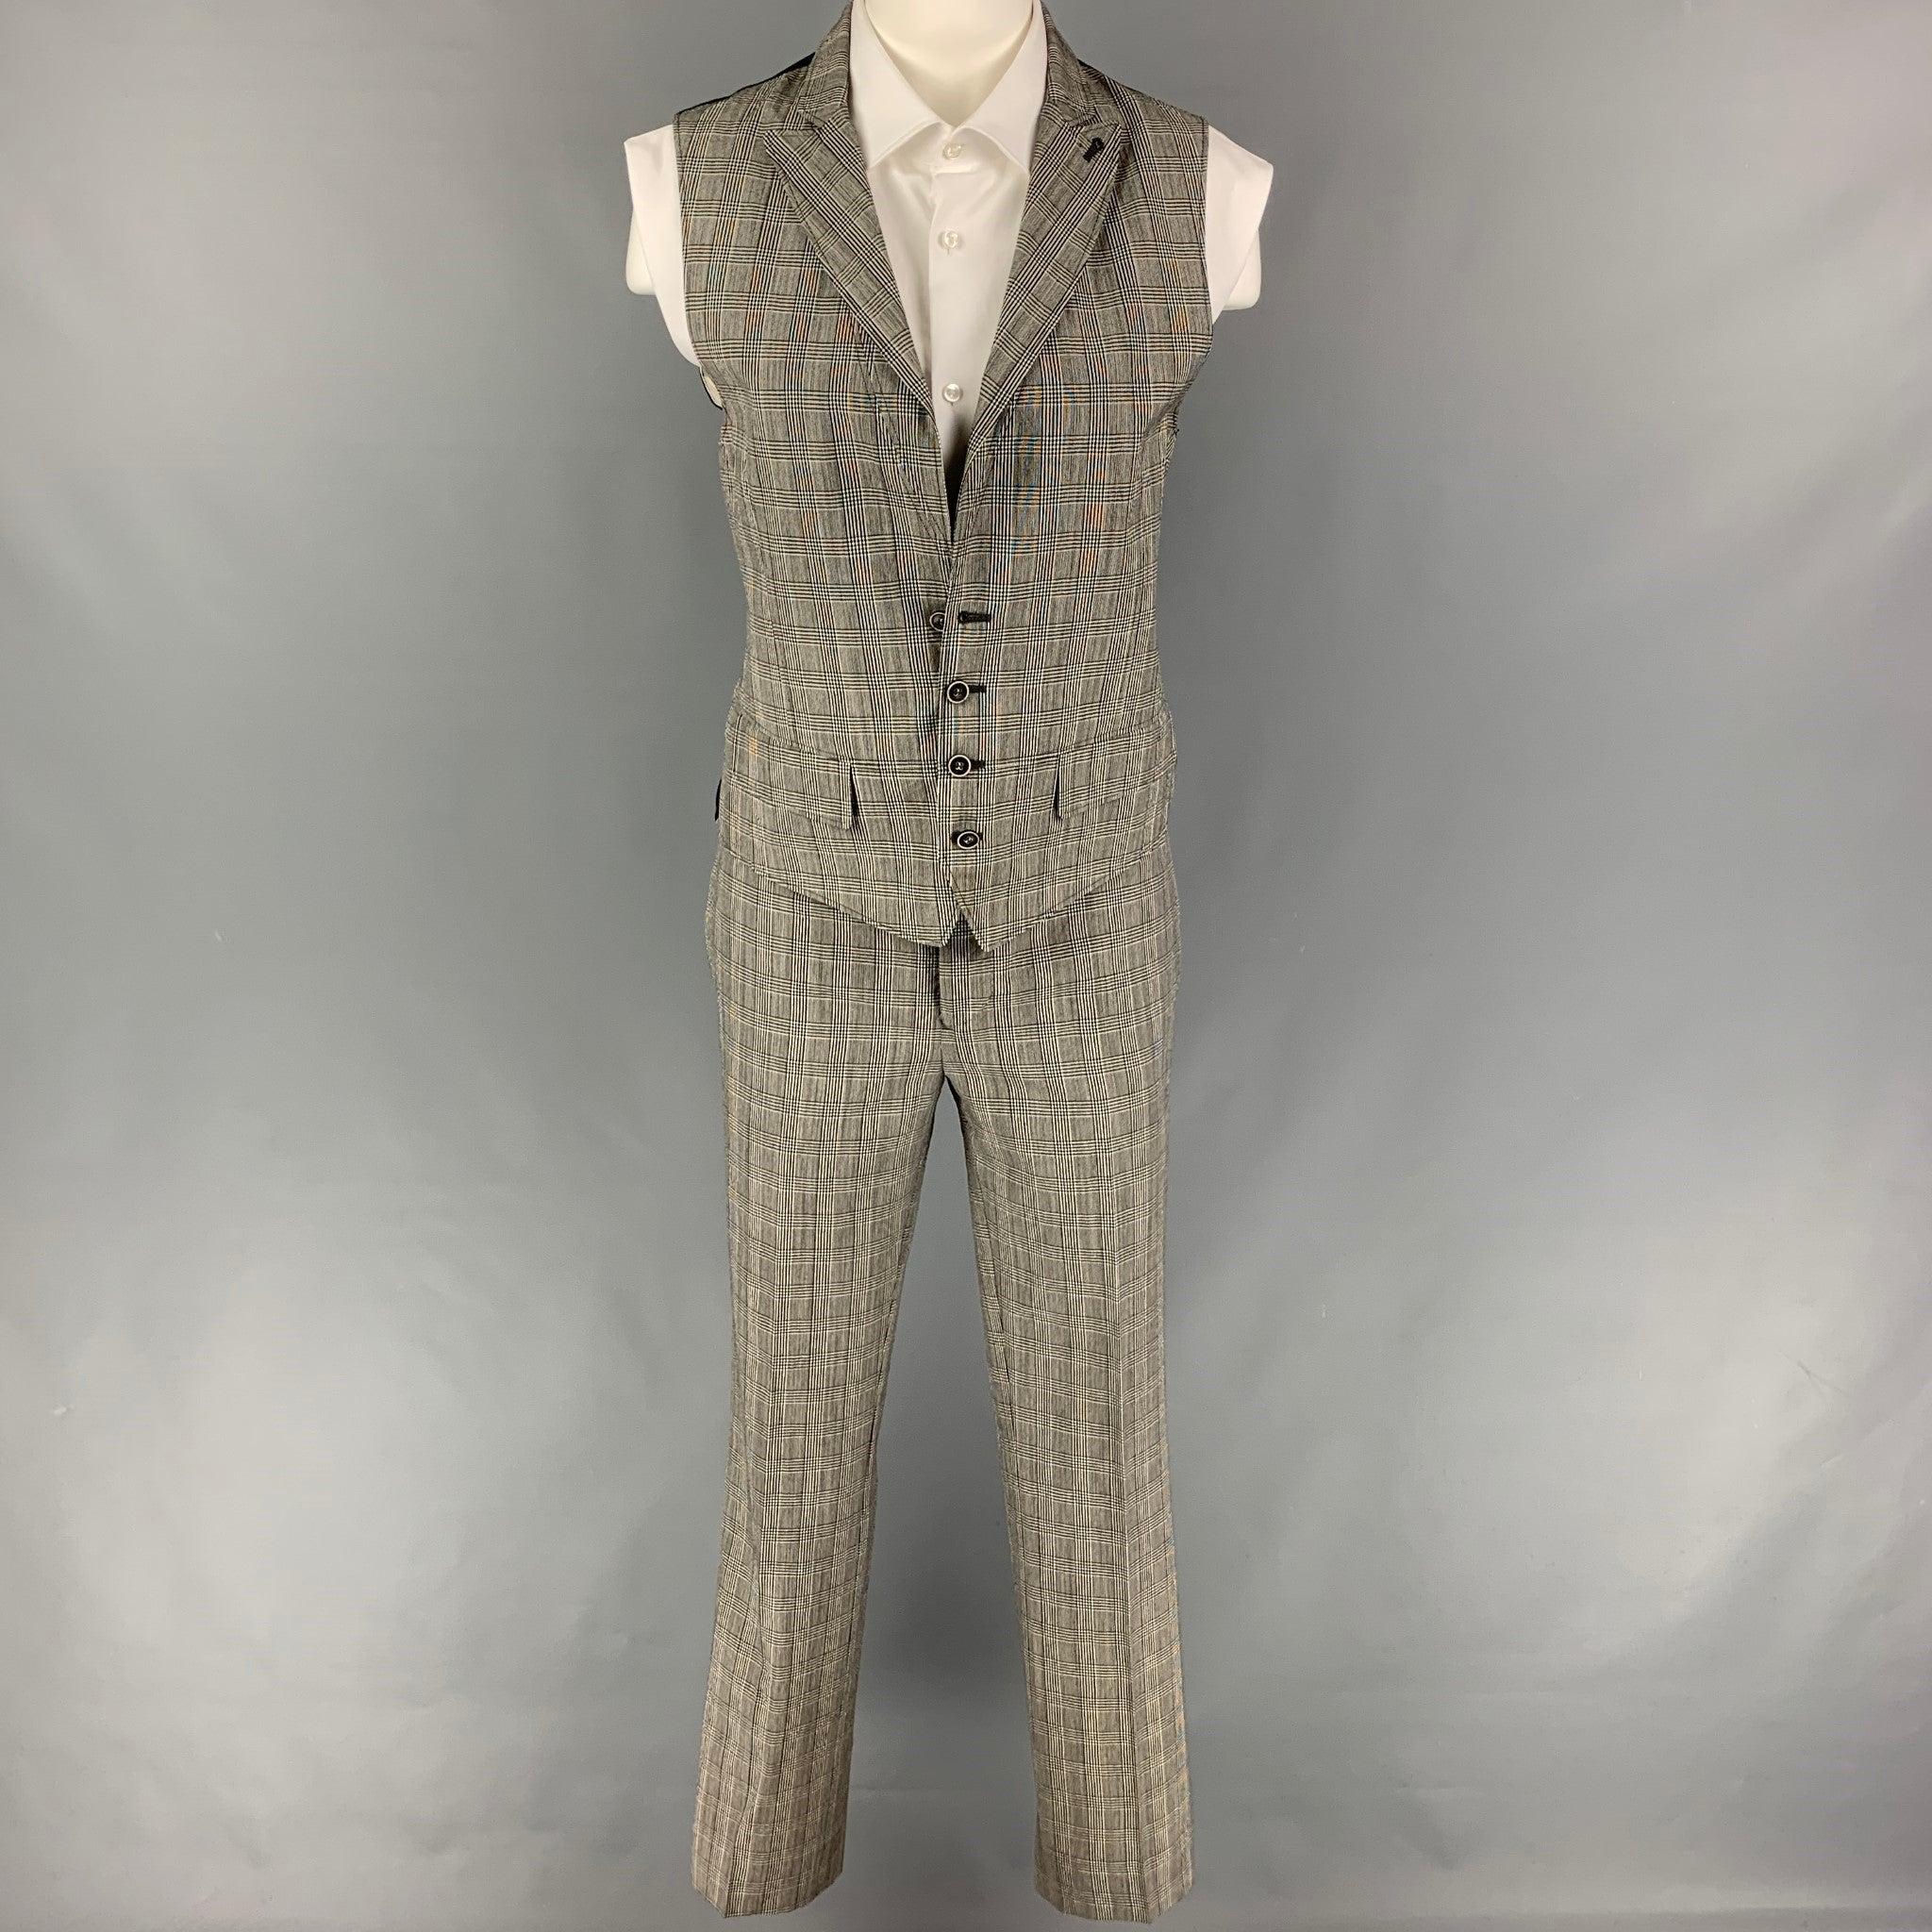 JOHN VARVATOS
suit comes in a black & white glenplaid wool and includes a single breasted, buttoned vest with a peak lapel and matching flat front trousers. Made in Italy. Very Good Pre-Owned Condition. 

Marked:   46 

Measurements: 
 